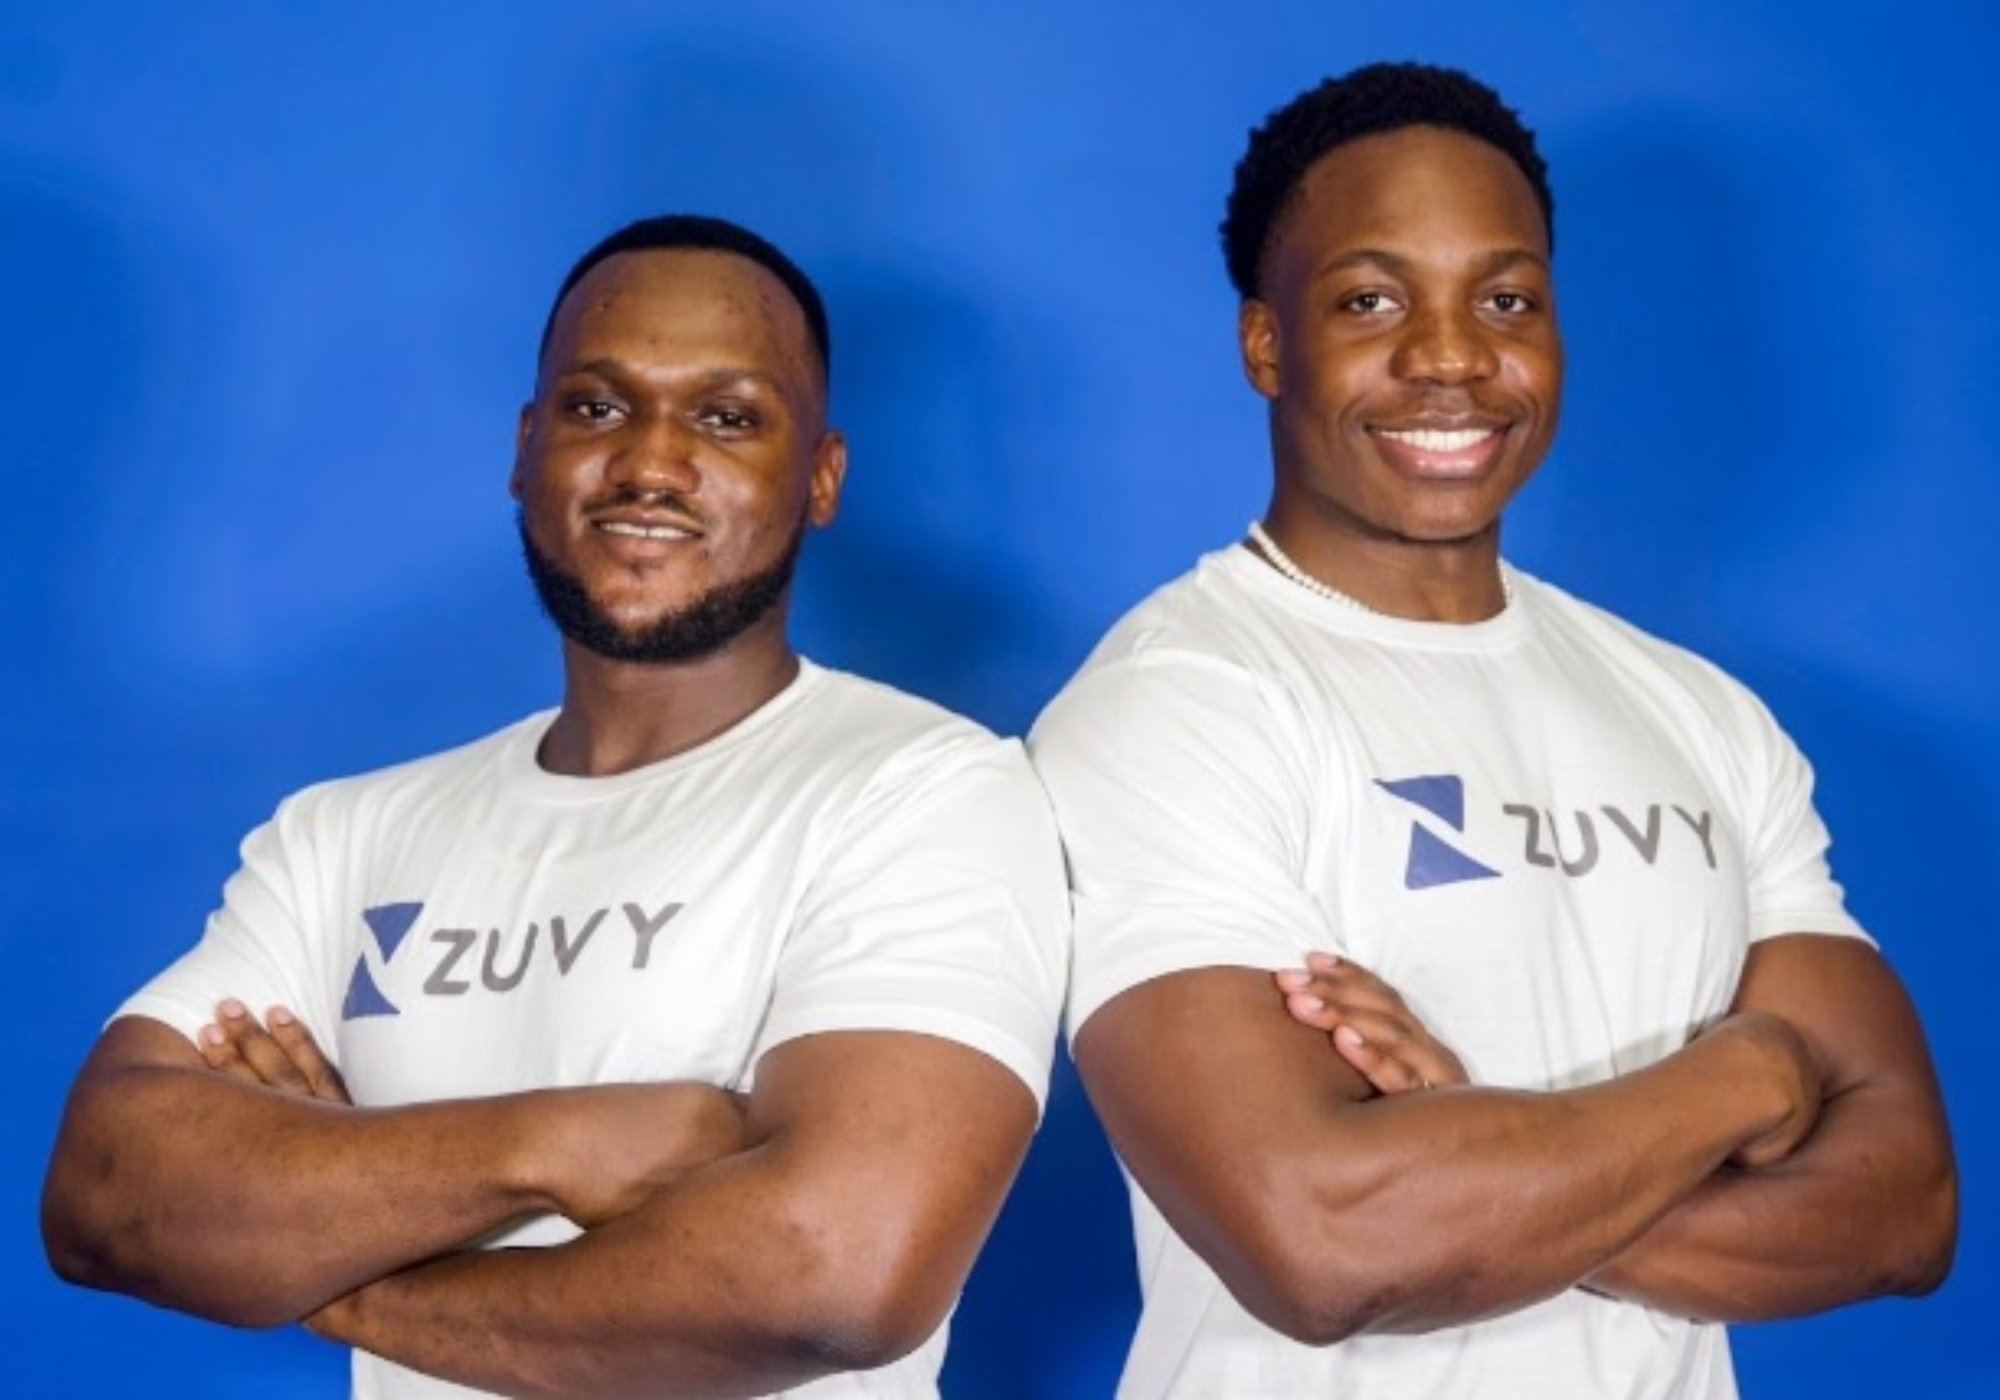 Nigerian Invoice Financing Startup, Zuvy Emerges From Stealth Mode With $4.5M